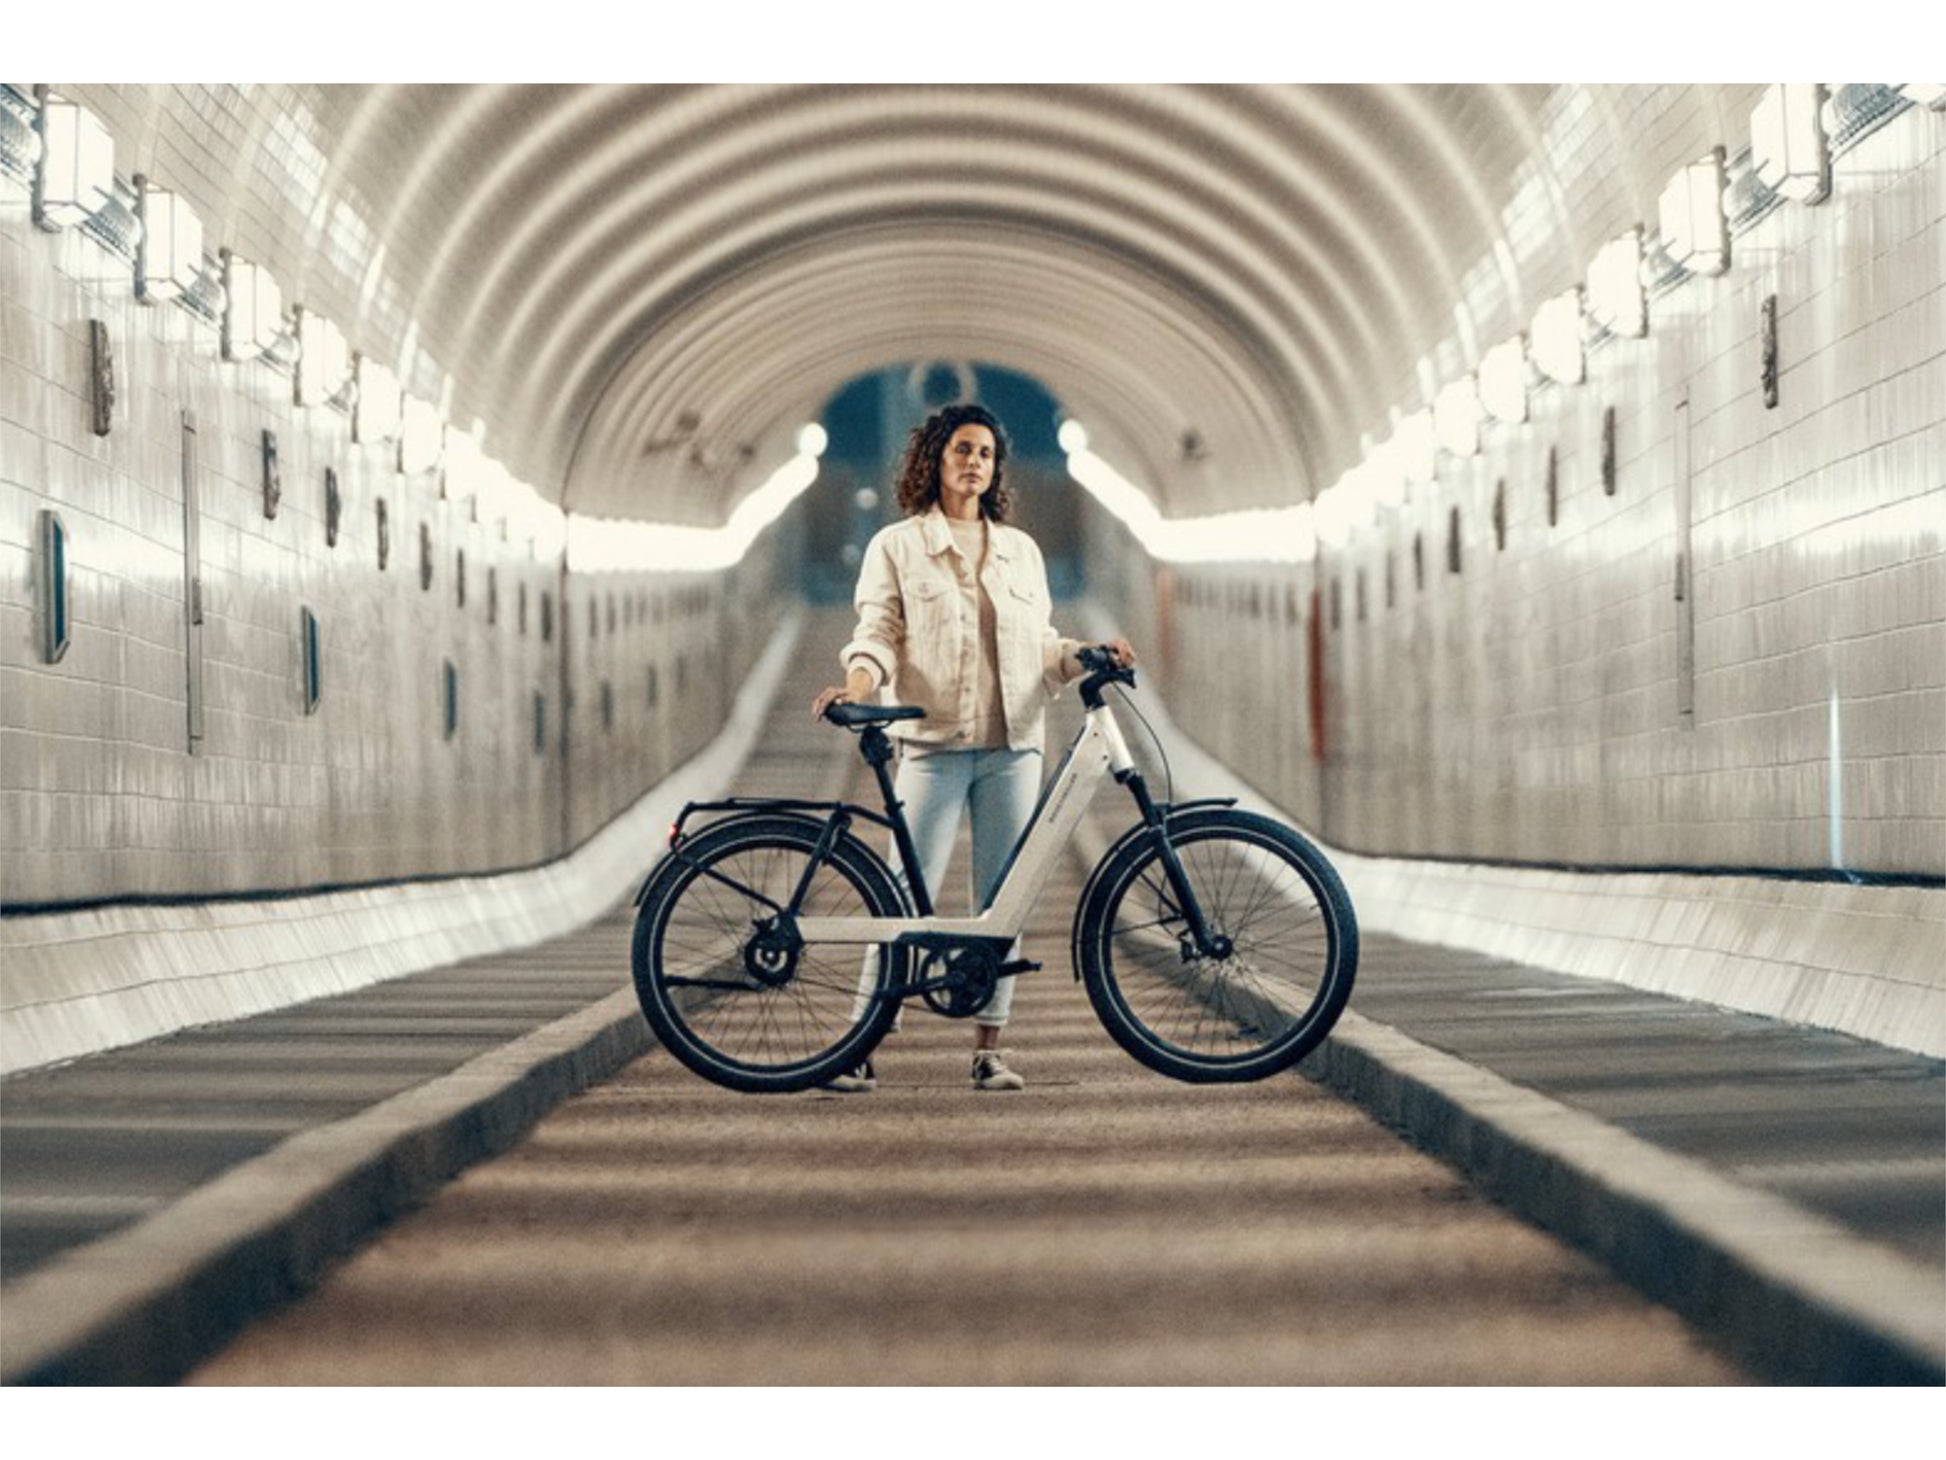 Riese and Muller Nevo GT Touring HS emtb hardtail woman in city tunnel bike path